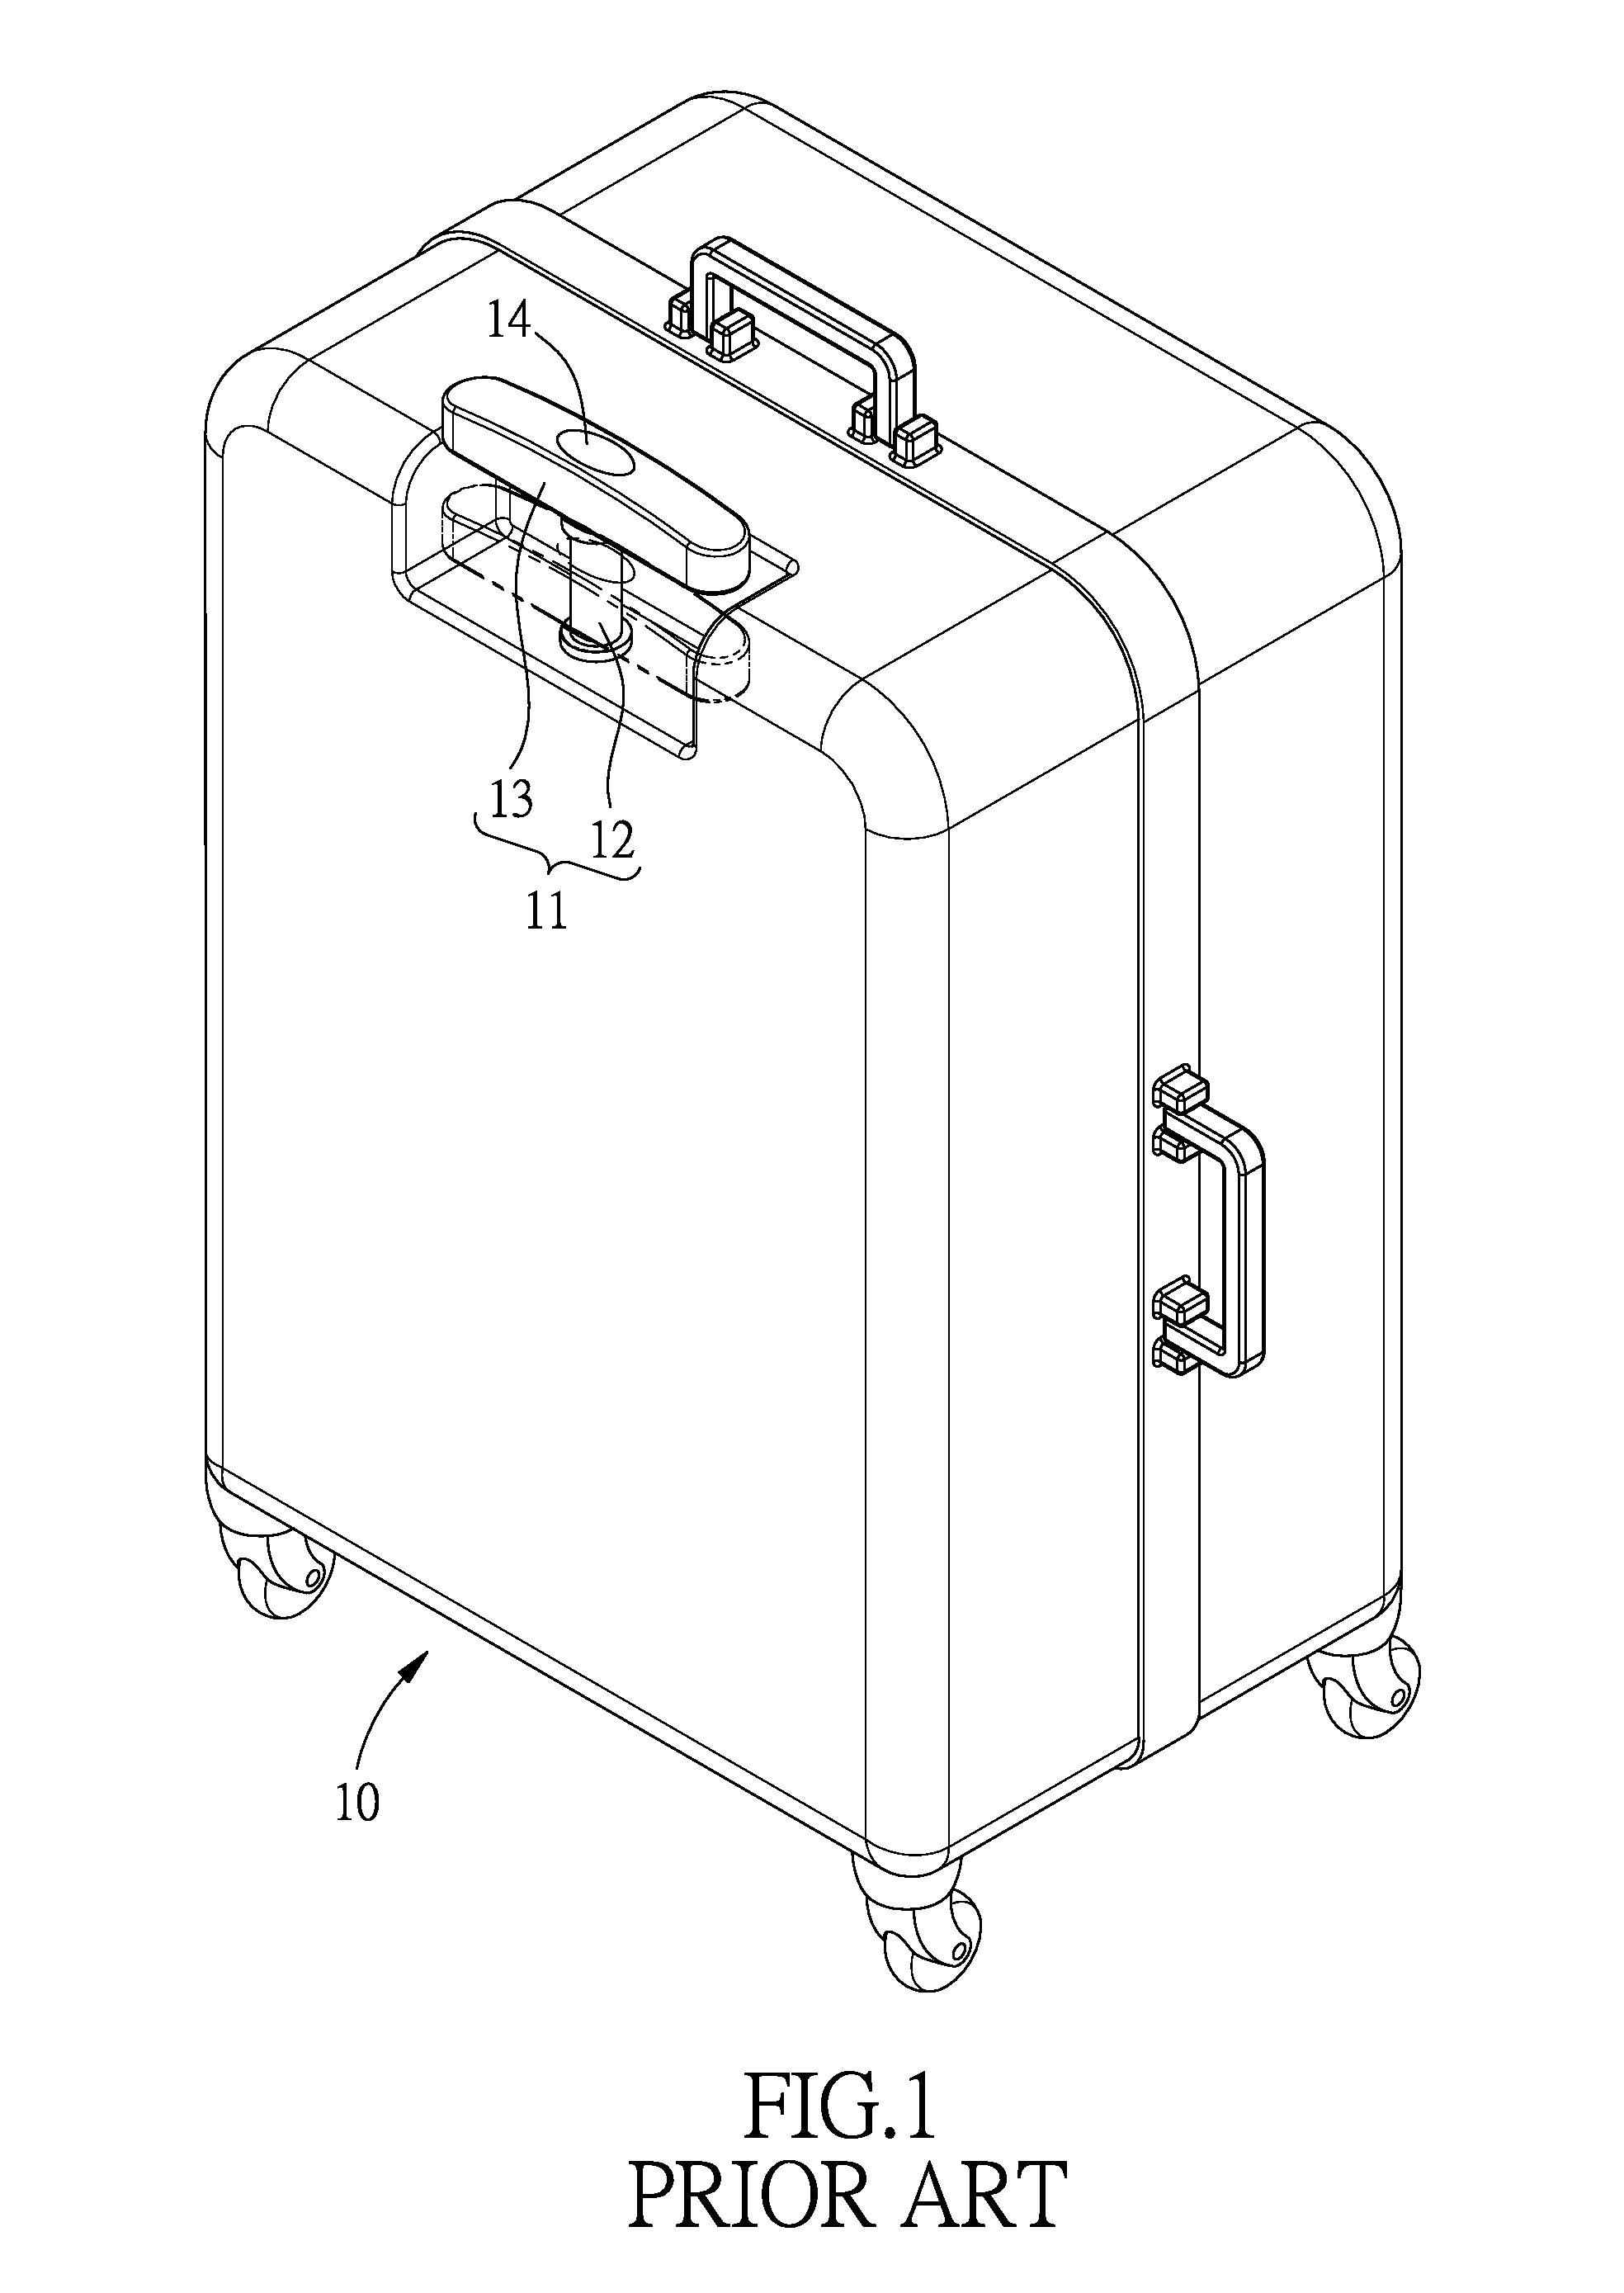 Handle structure for a draw bar of a luggage case